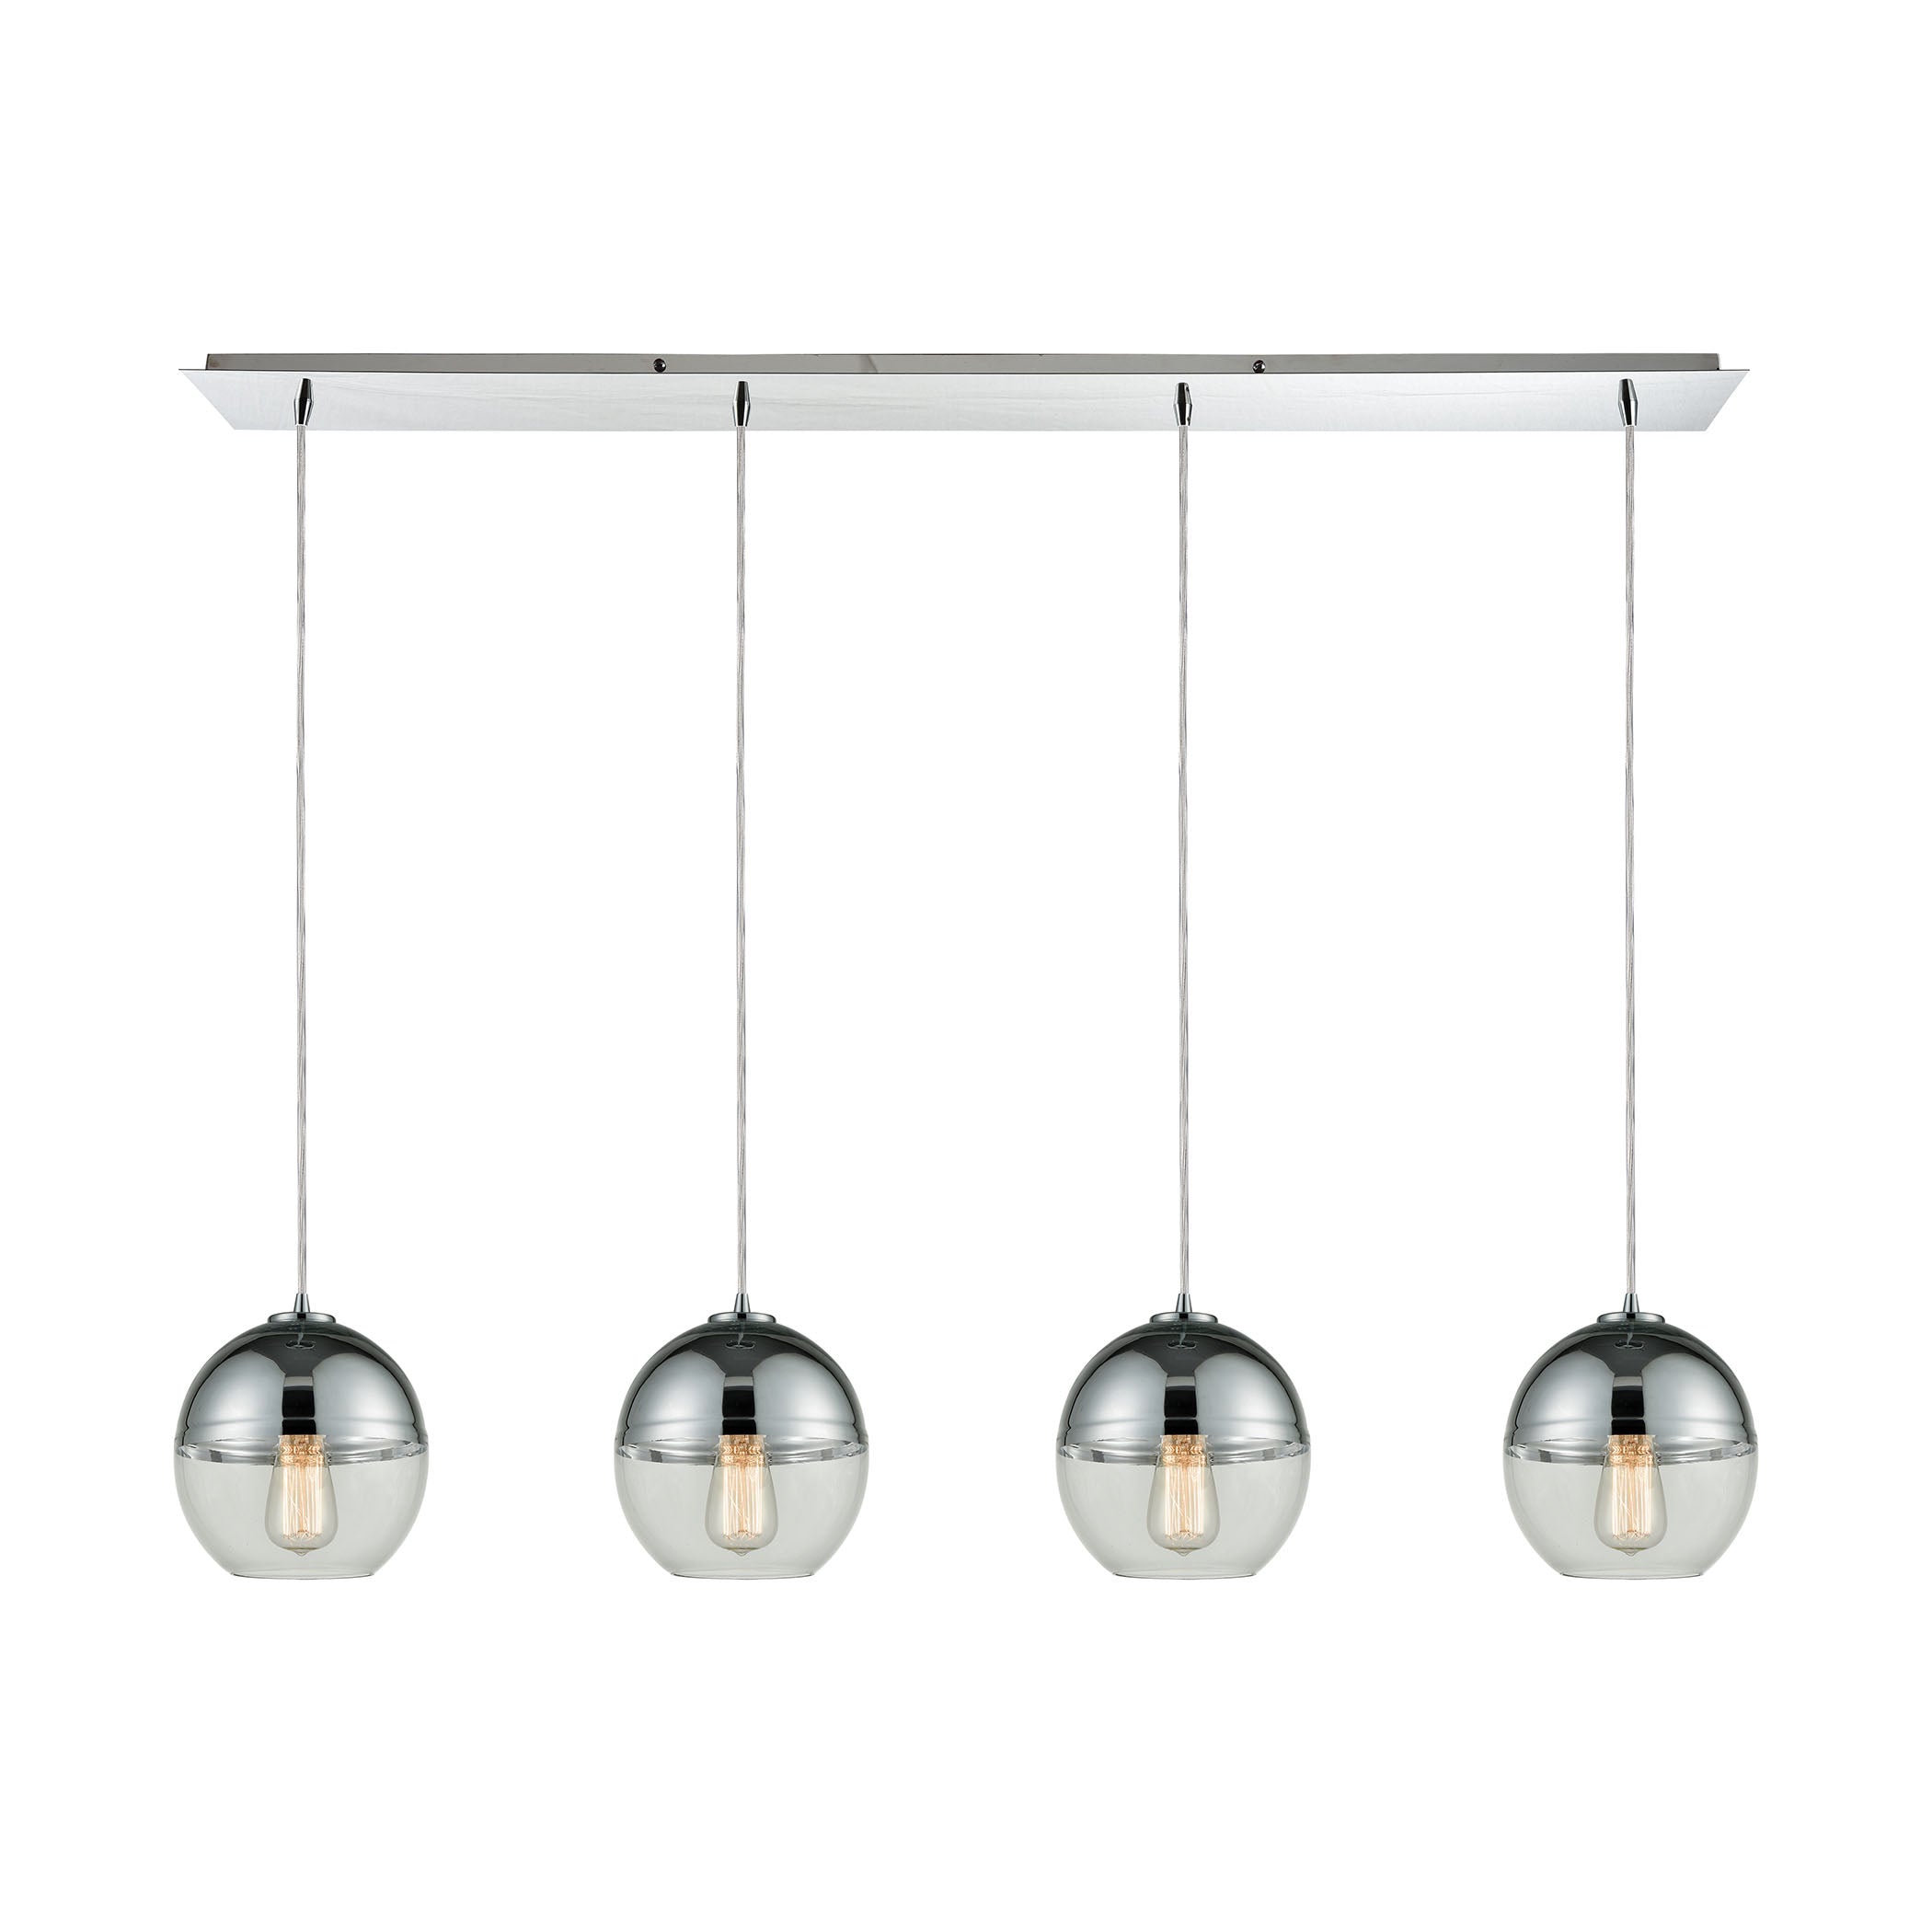 ELK Lighting 10492/4LP Revelo 4-Light Linear Pendant Fixture in Polished Chrome with Clear and Chrome-plated Glass